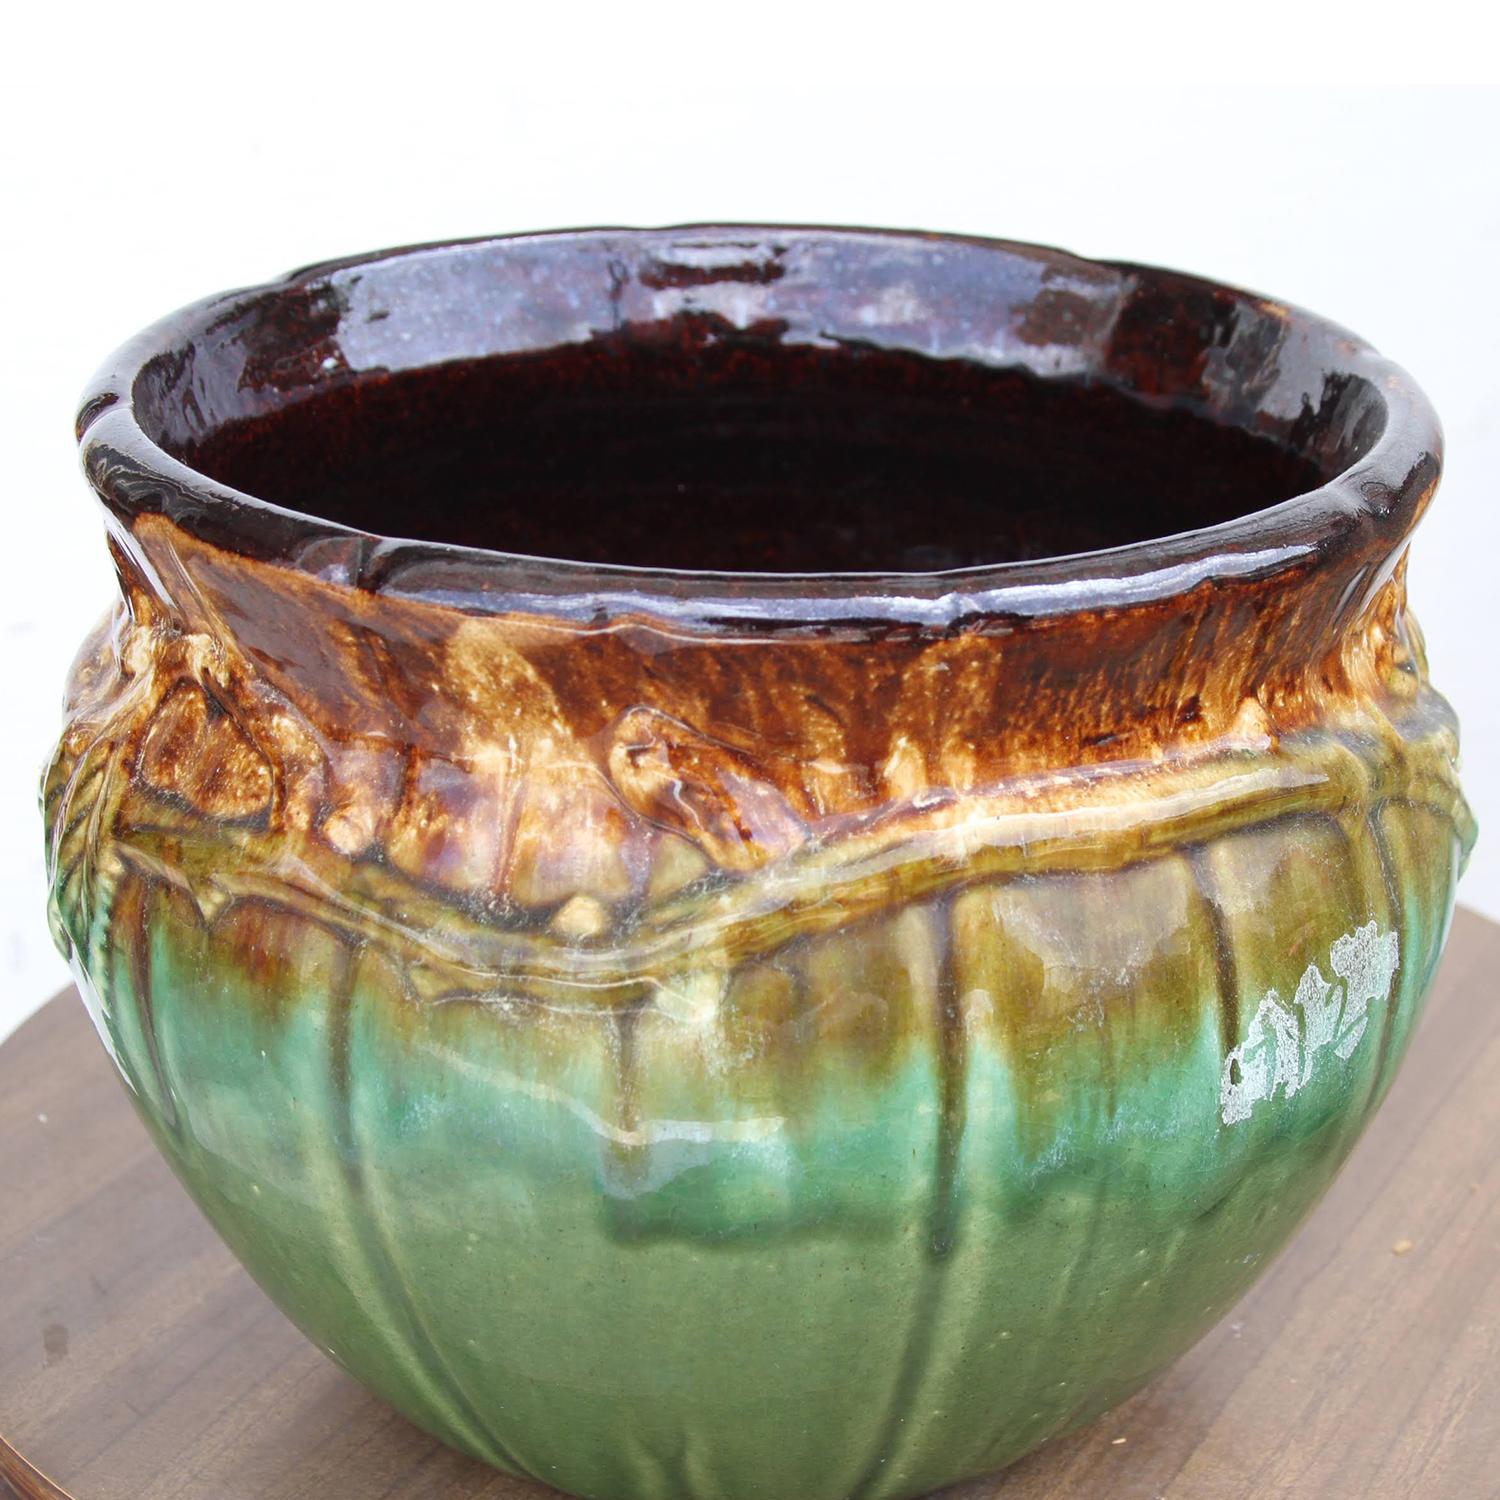 Vintage Mid Century Roseville pottery

Beautiful planter by Robinson Ransbottom Pottery (RRP) Company from Roseville Ohio. This is an old Weller mold pattern used by RRP Co is style # 421. Finished in a lovely brown, green and aqua drip glaze. The